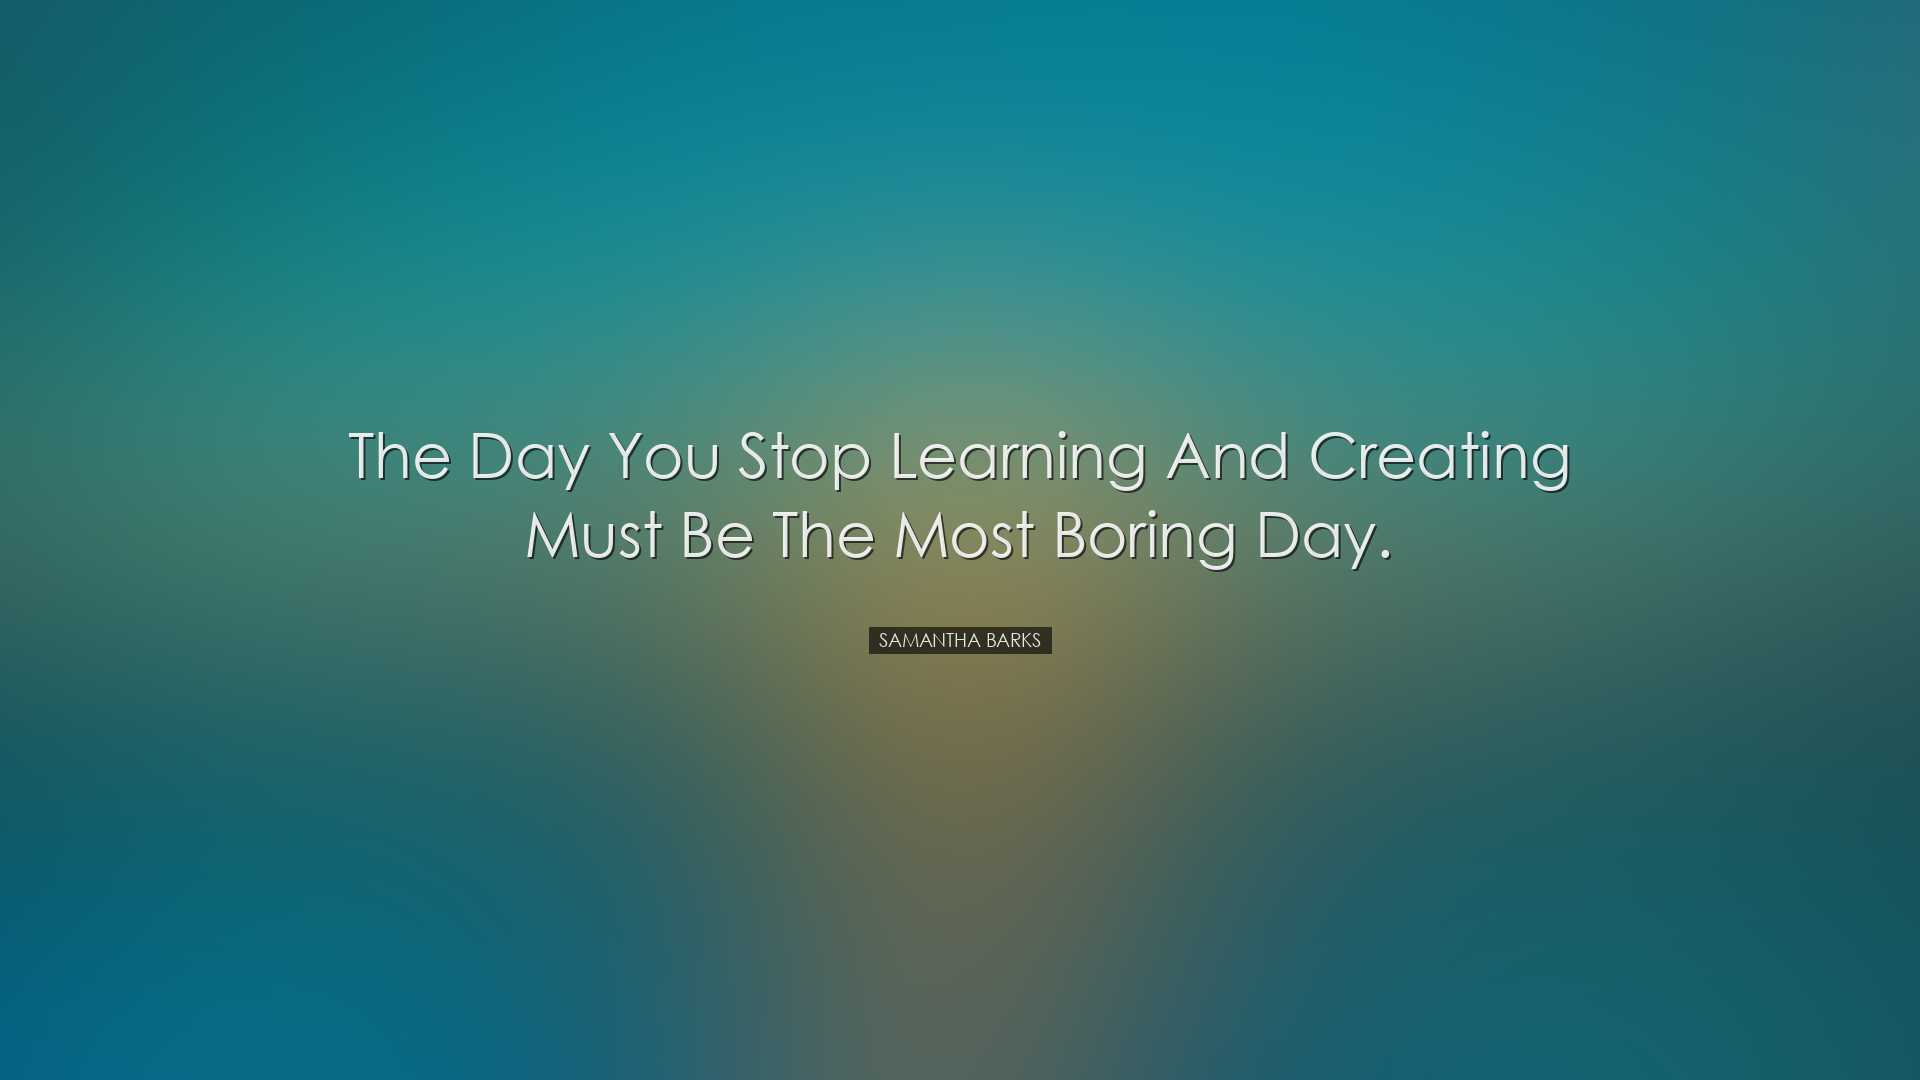 The day you stop learning and creating must be the most boring day